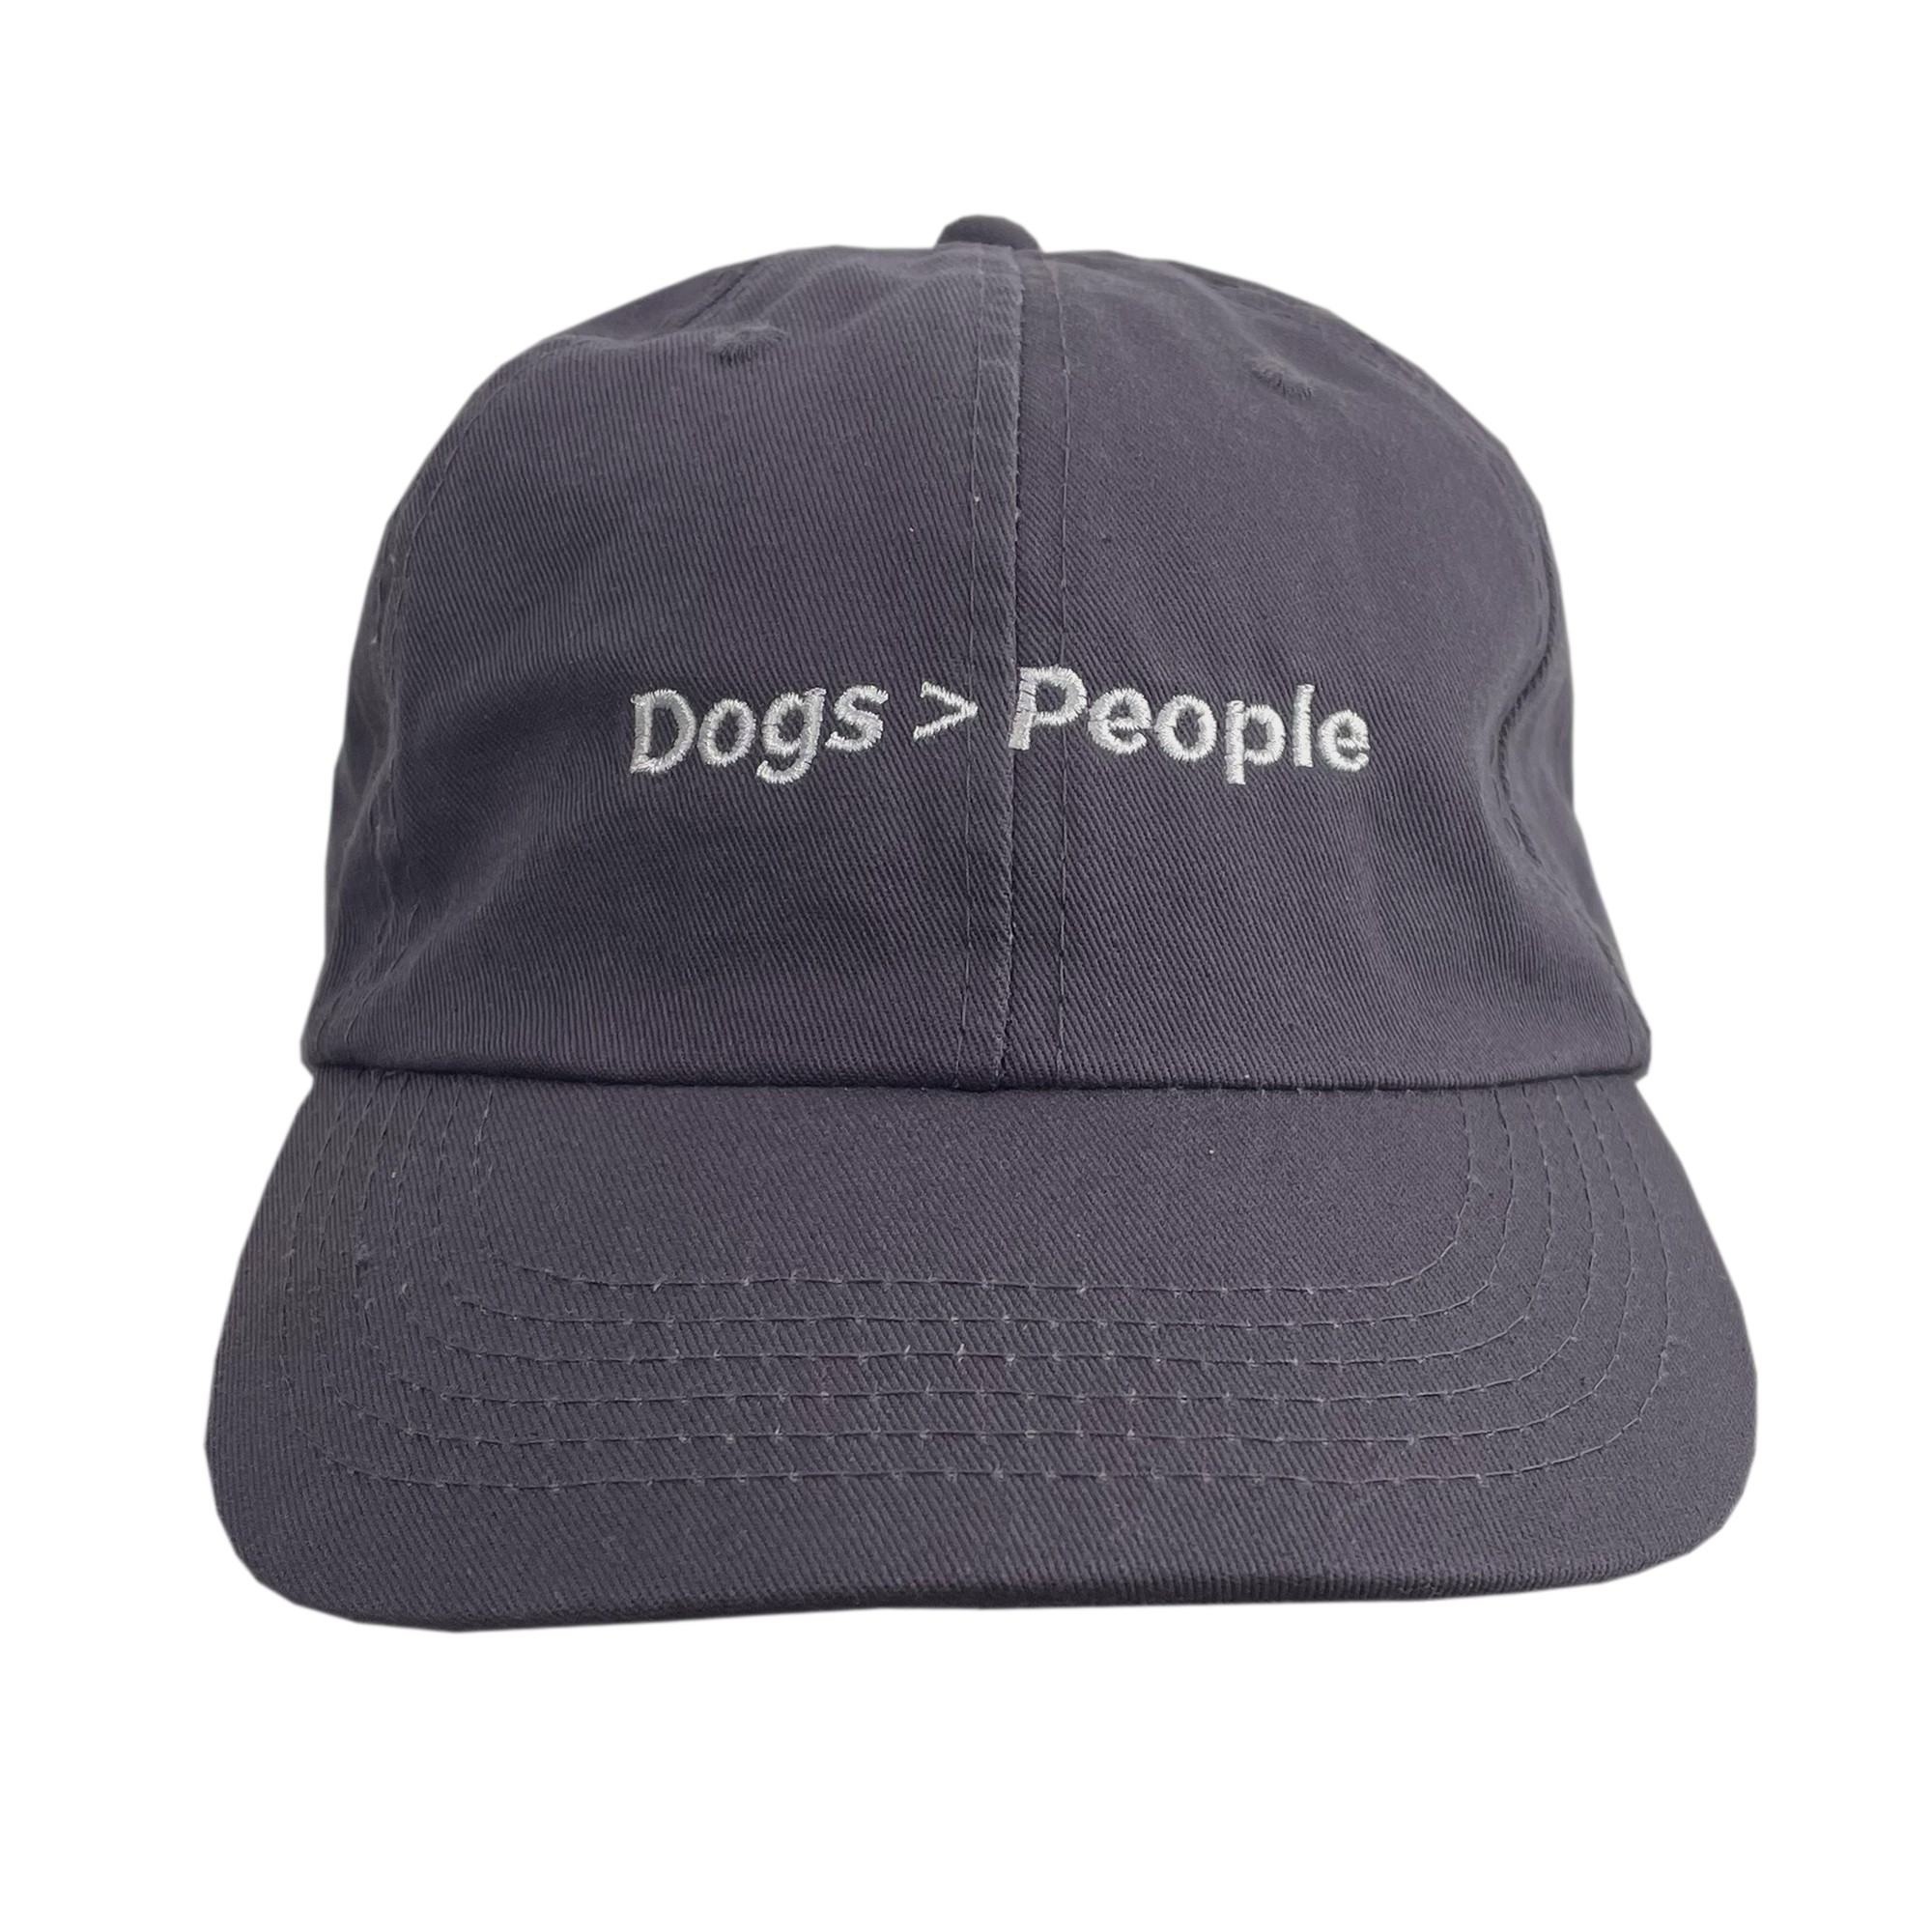 DOGS ARE BETTER CHARCOAL DAD HAT